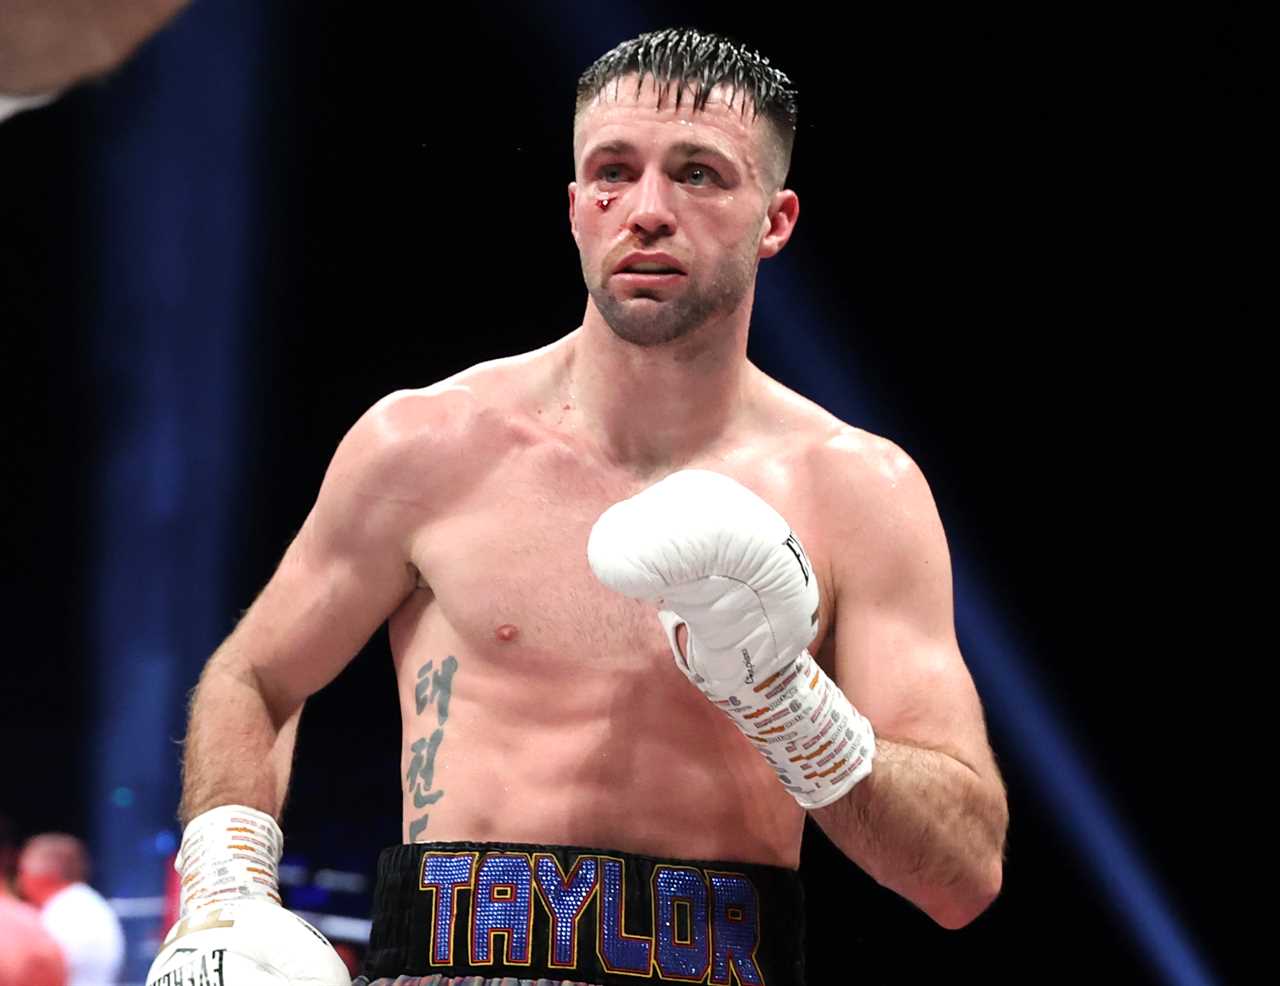 Unimpressed Josh Taylor replies to Teofimo's death threat by saying 'the guy is a wreck', and calls an ambulance